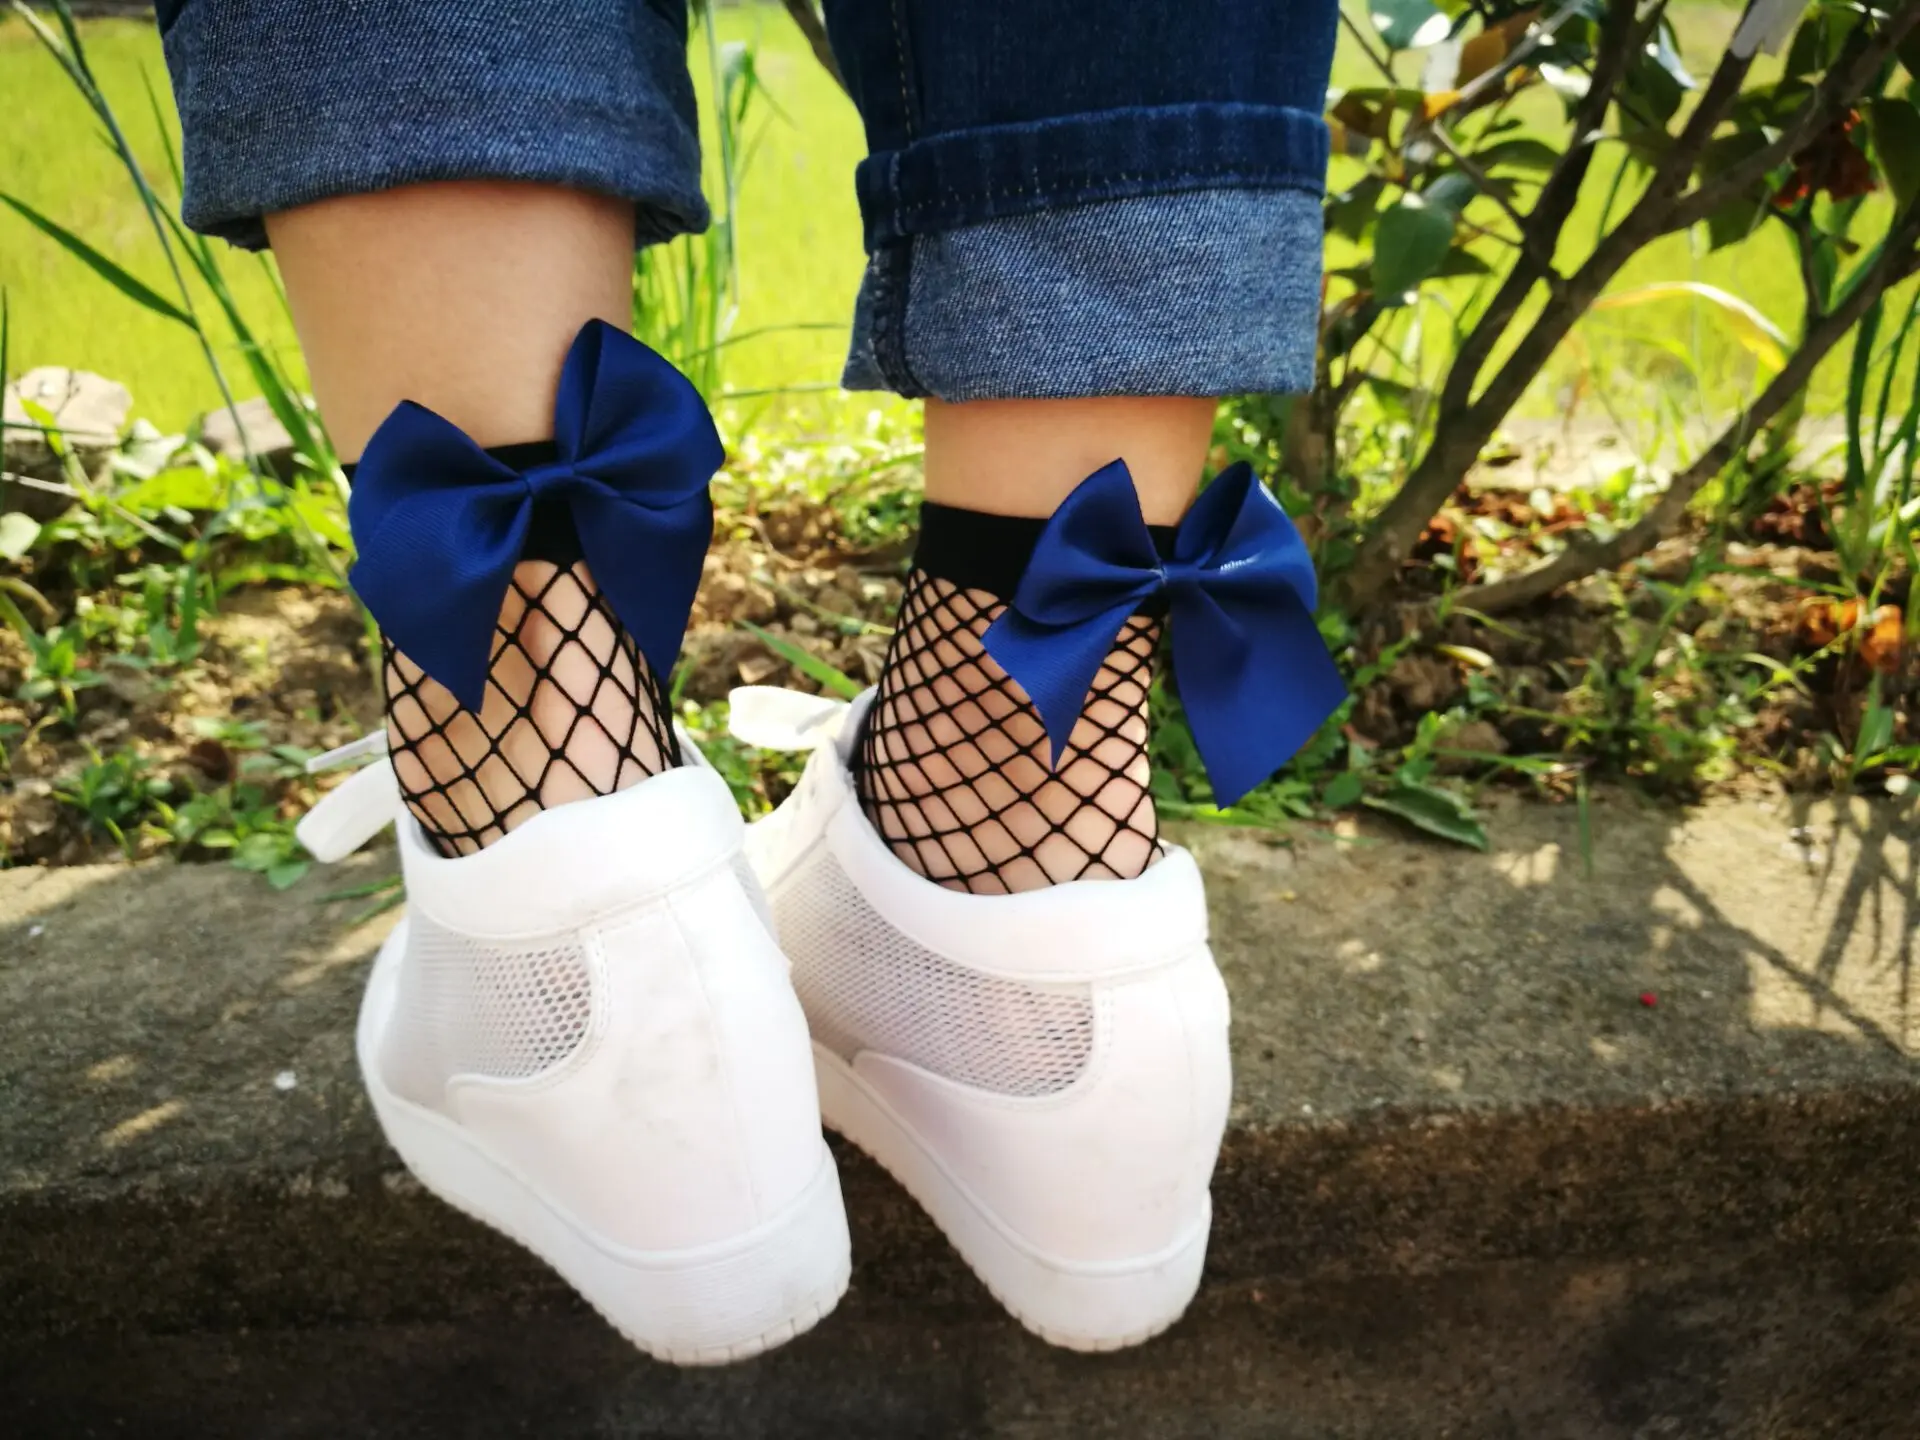 Women Ruffle Fishnet Ankle High Mesh Lace Fish Net Short Socks with Bow Tie